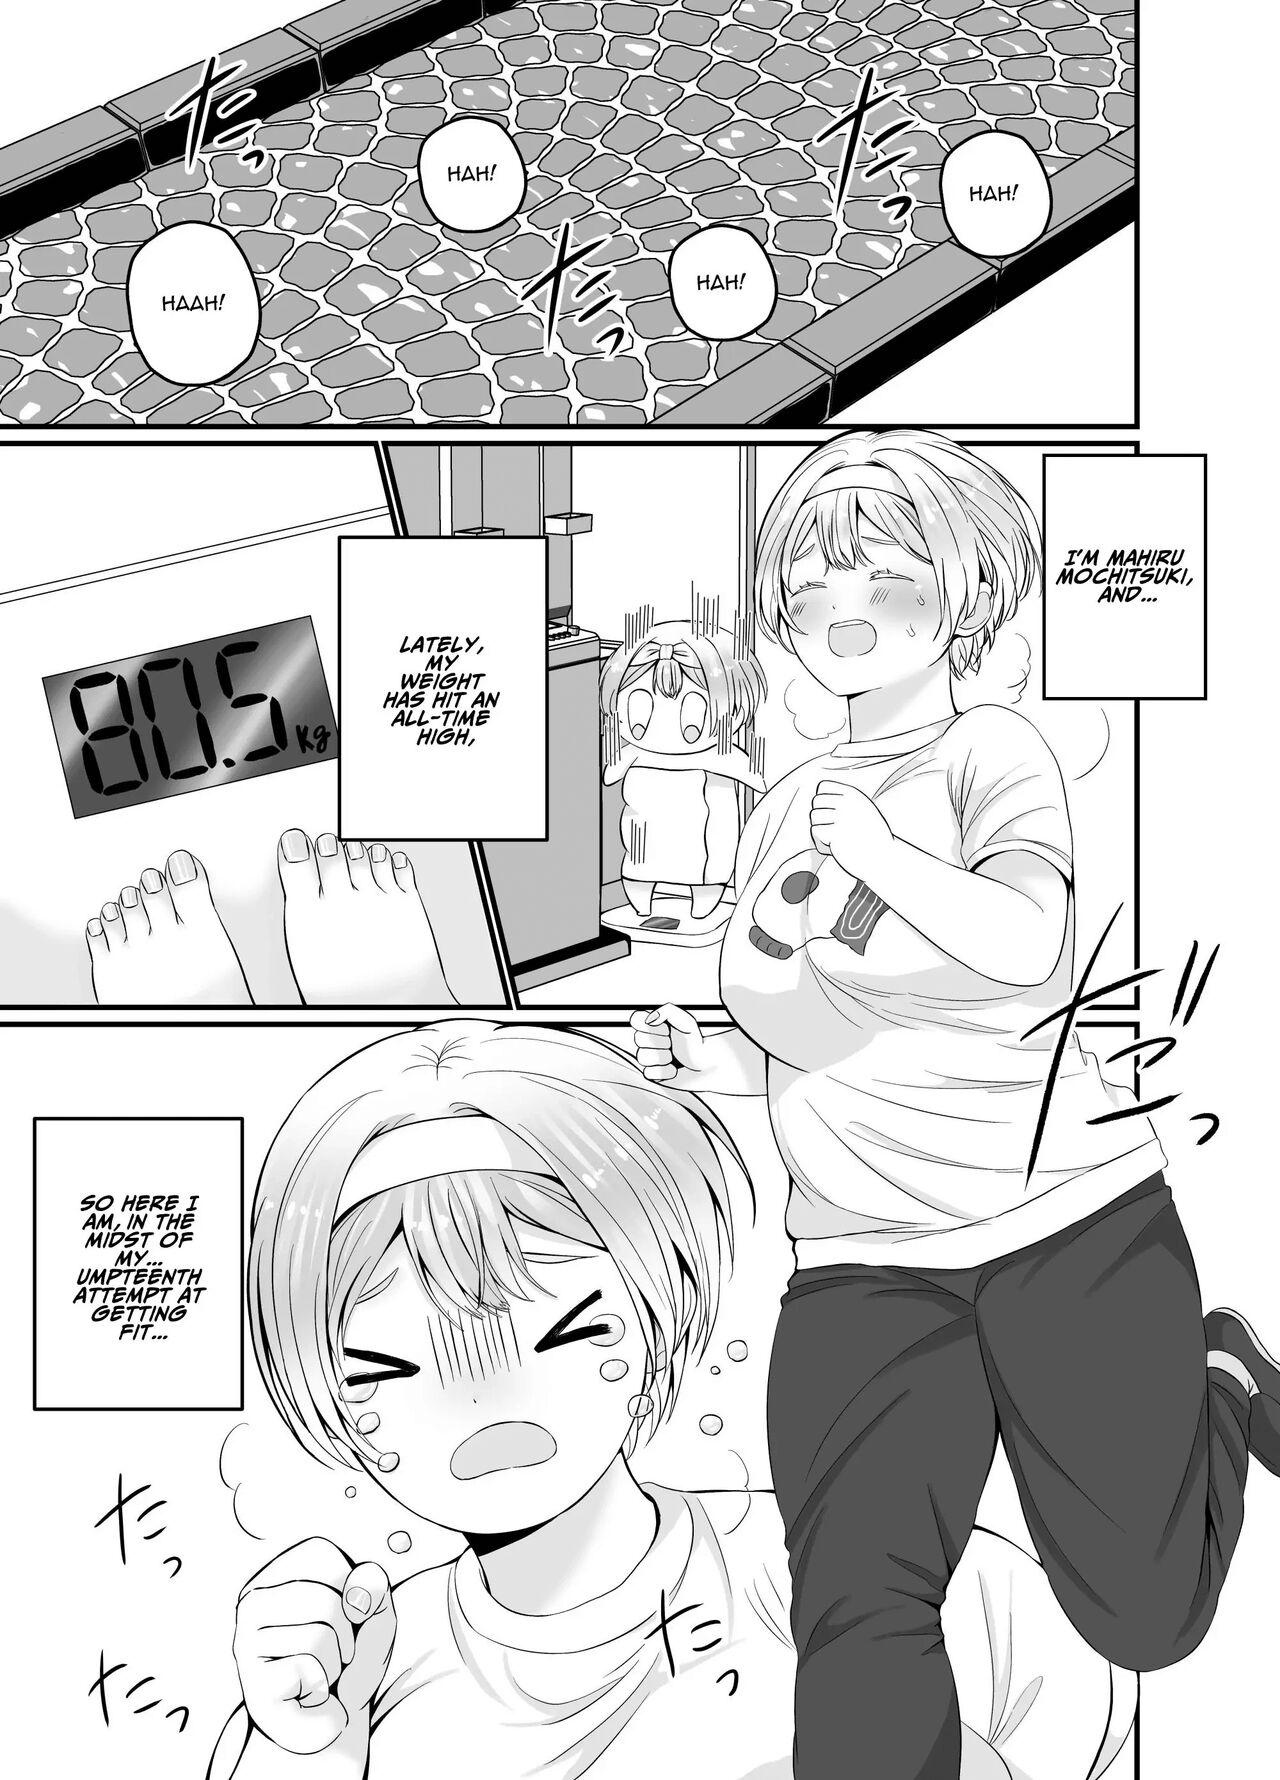 Ass Fucked Korette Sex desu yo ne!? ︎Iie, Training desu! | This is basically sex, isn't it!? Of course not, this is training! - Original Pussy Fingering - Page 4